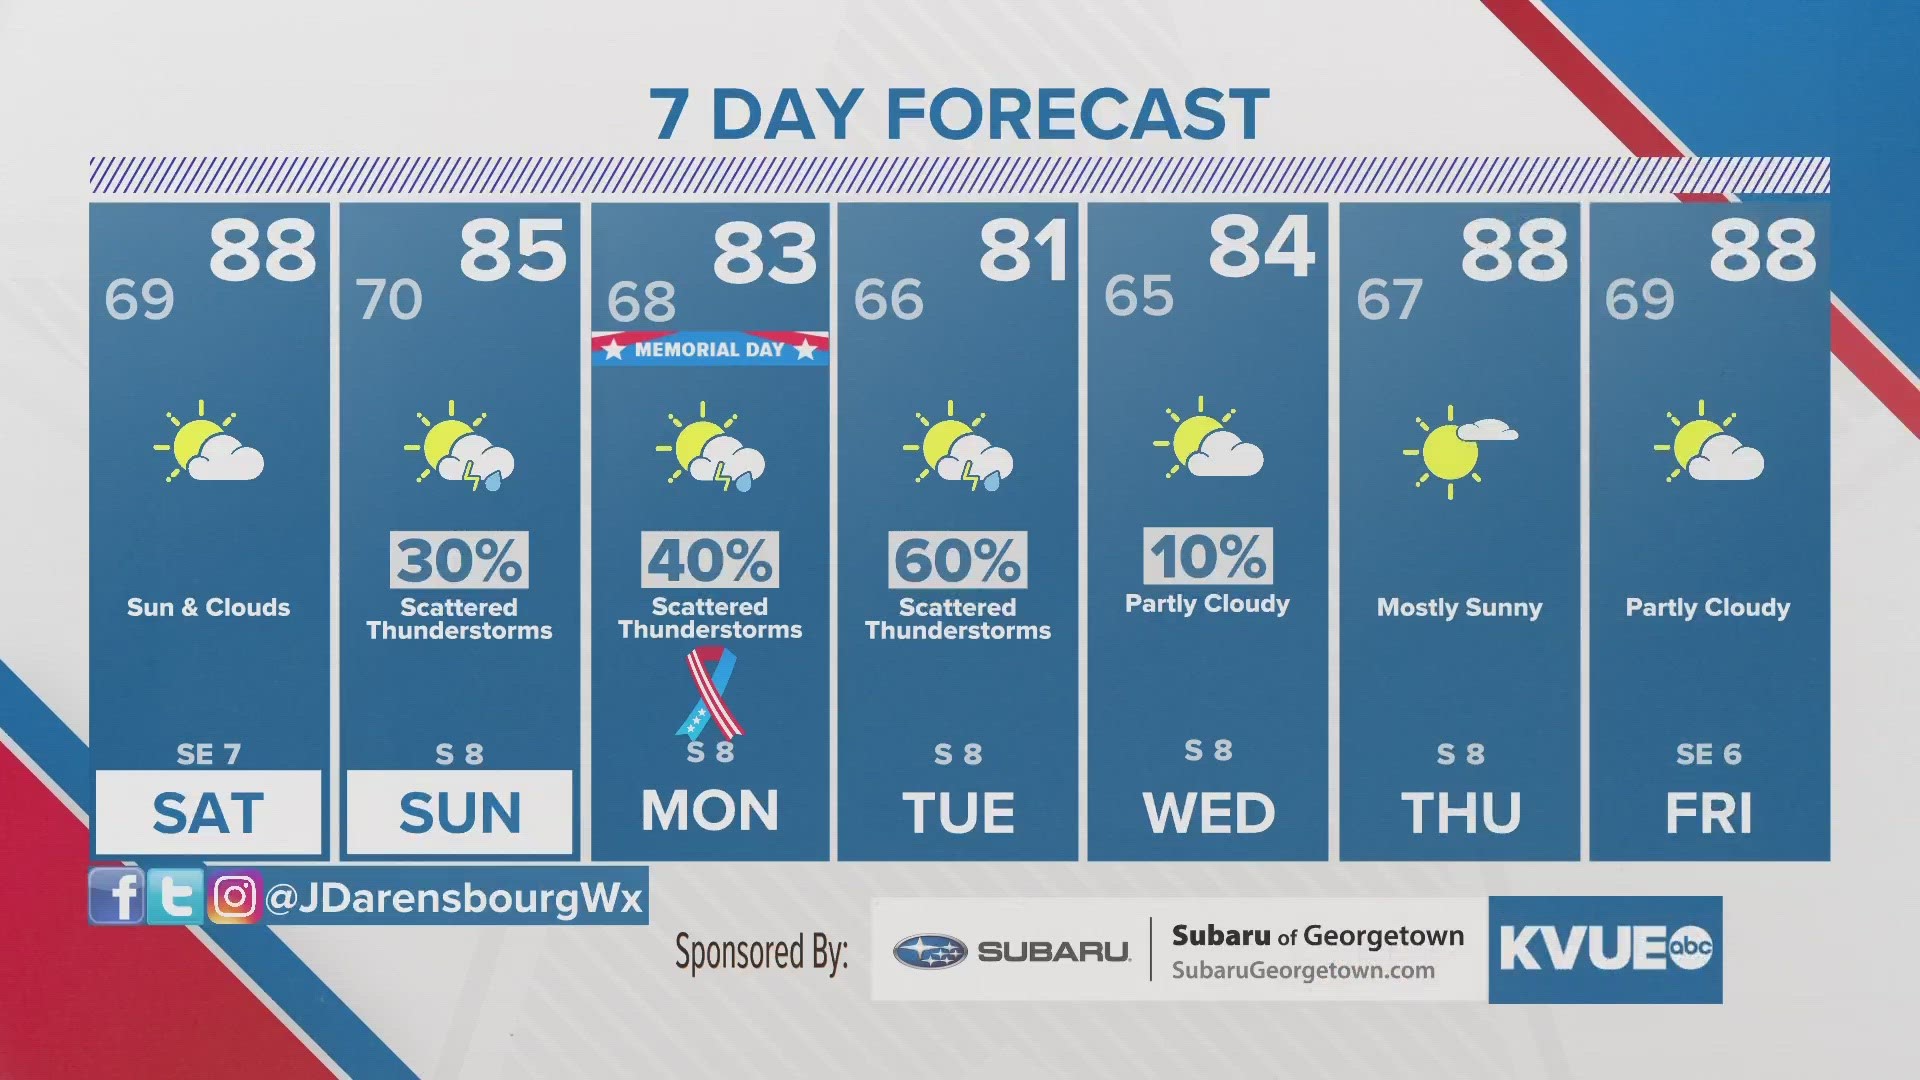 Rain chances increase for Sunday and Monday